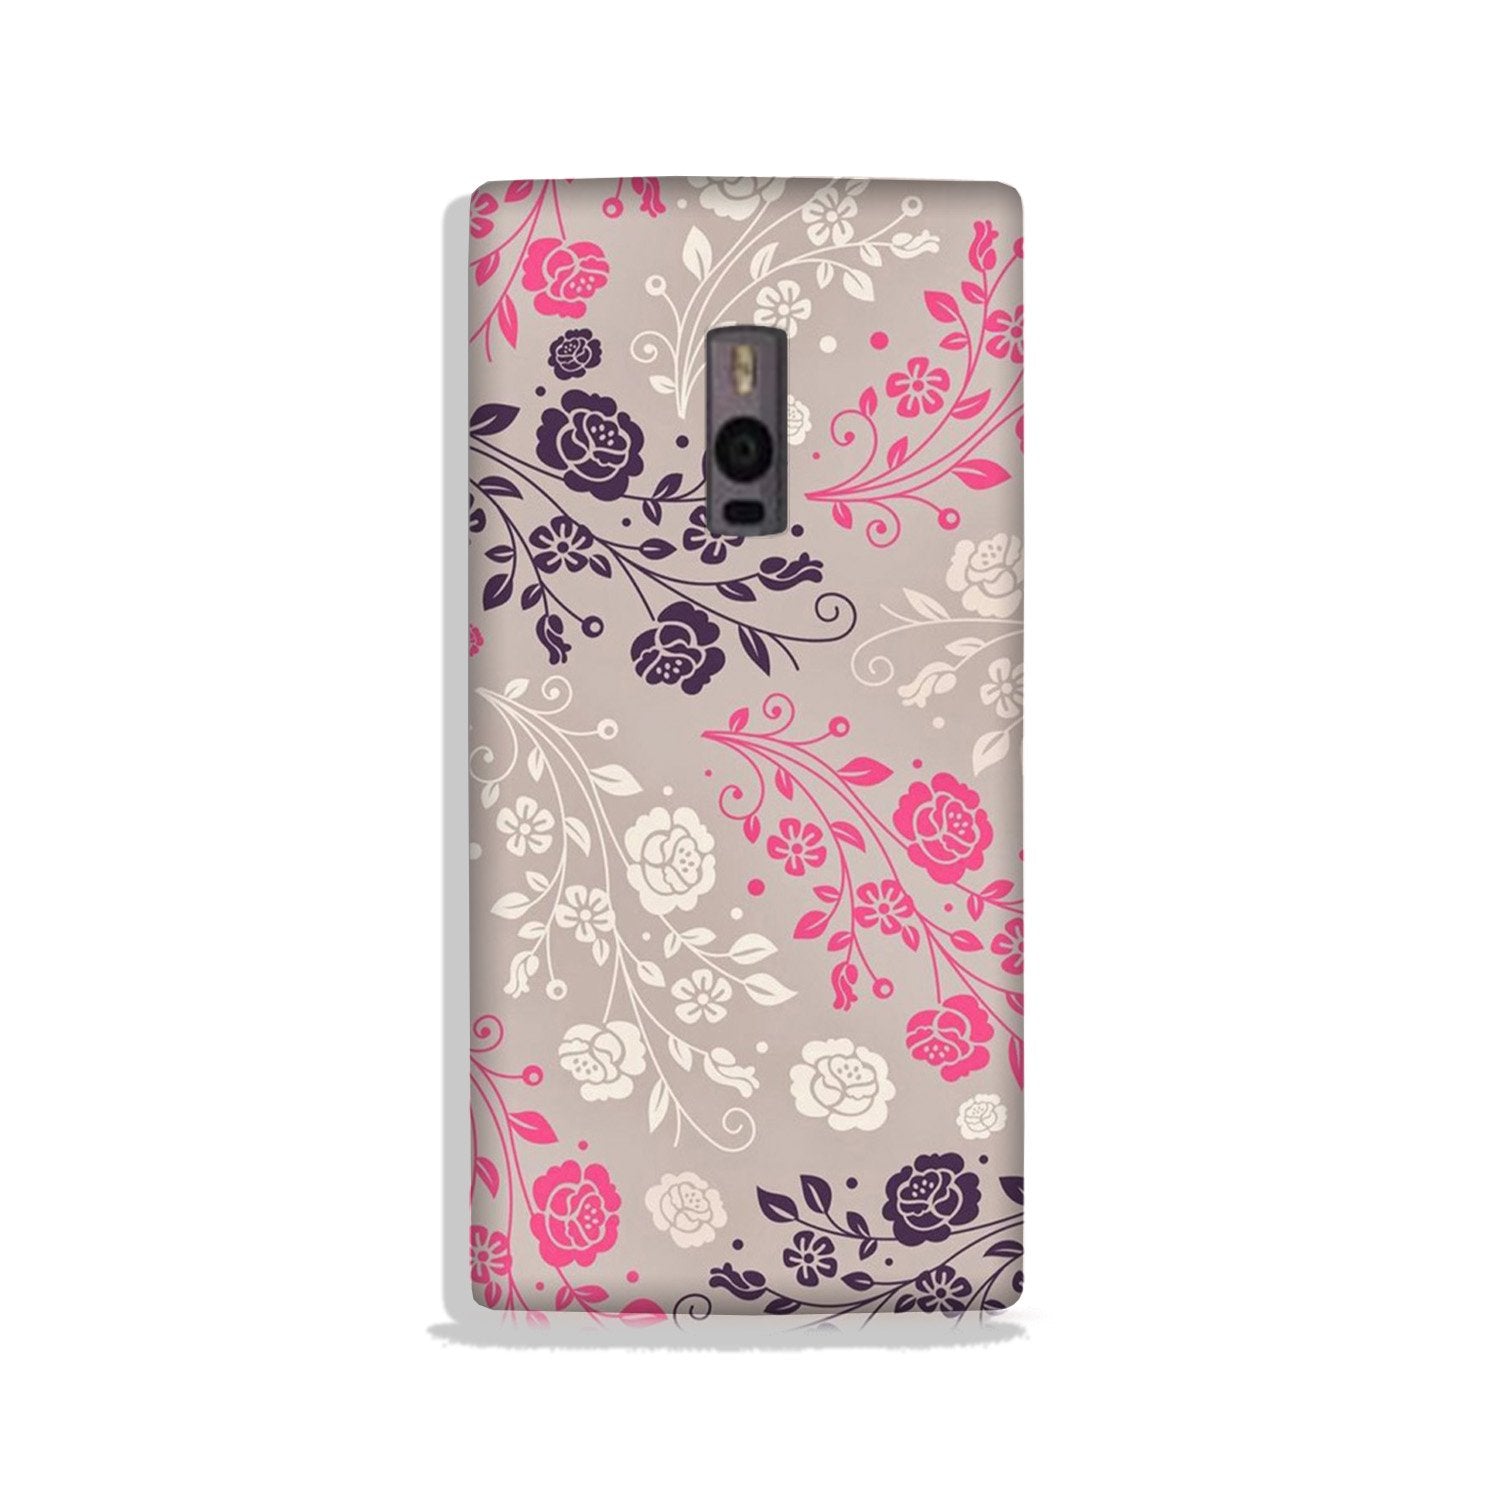 Pattern2 Case for OnePlus 2